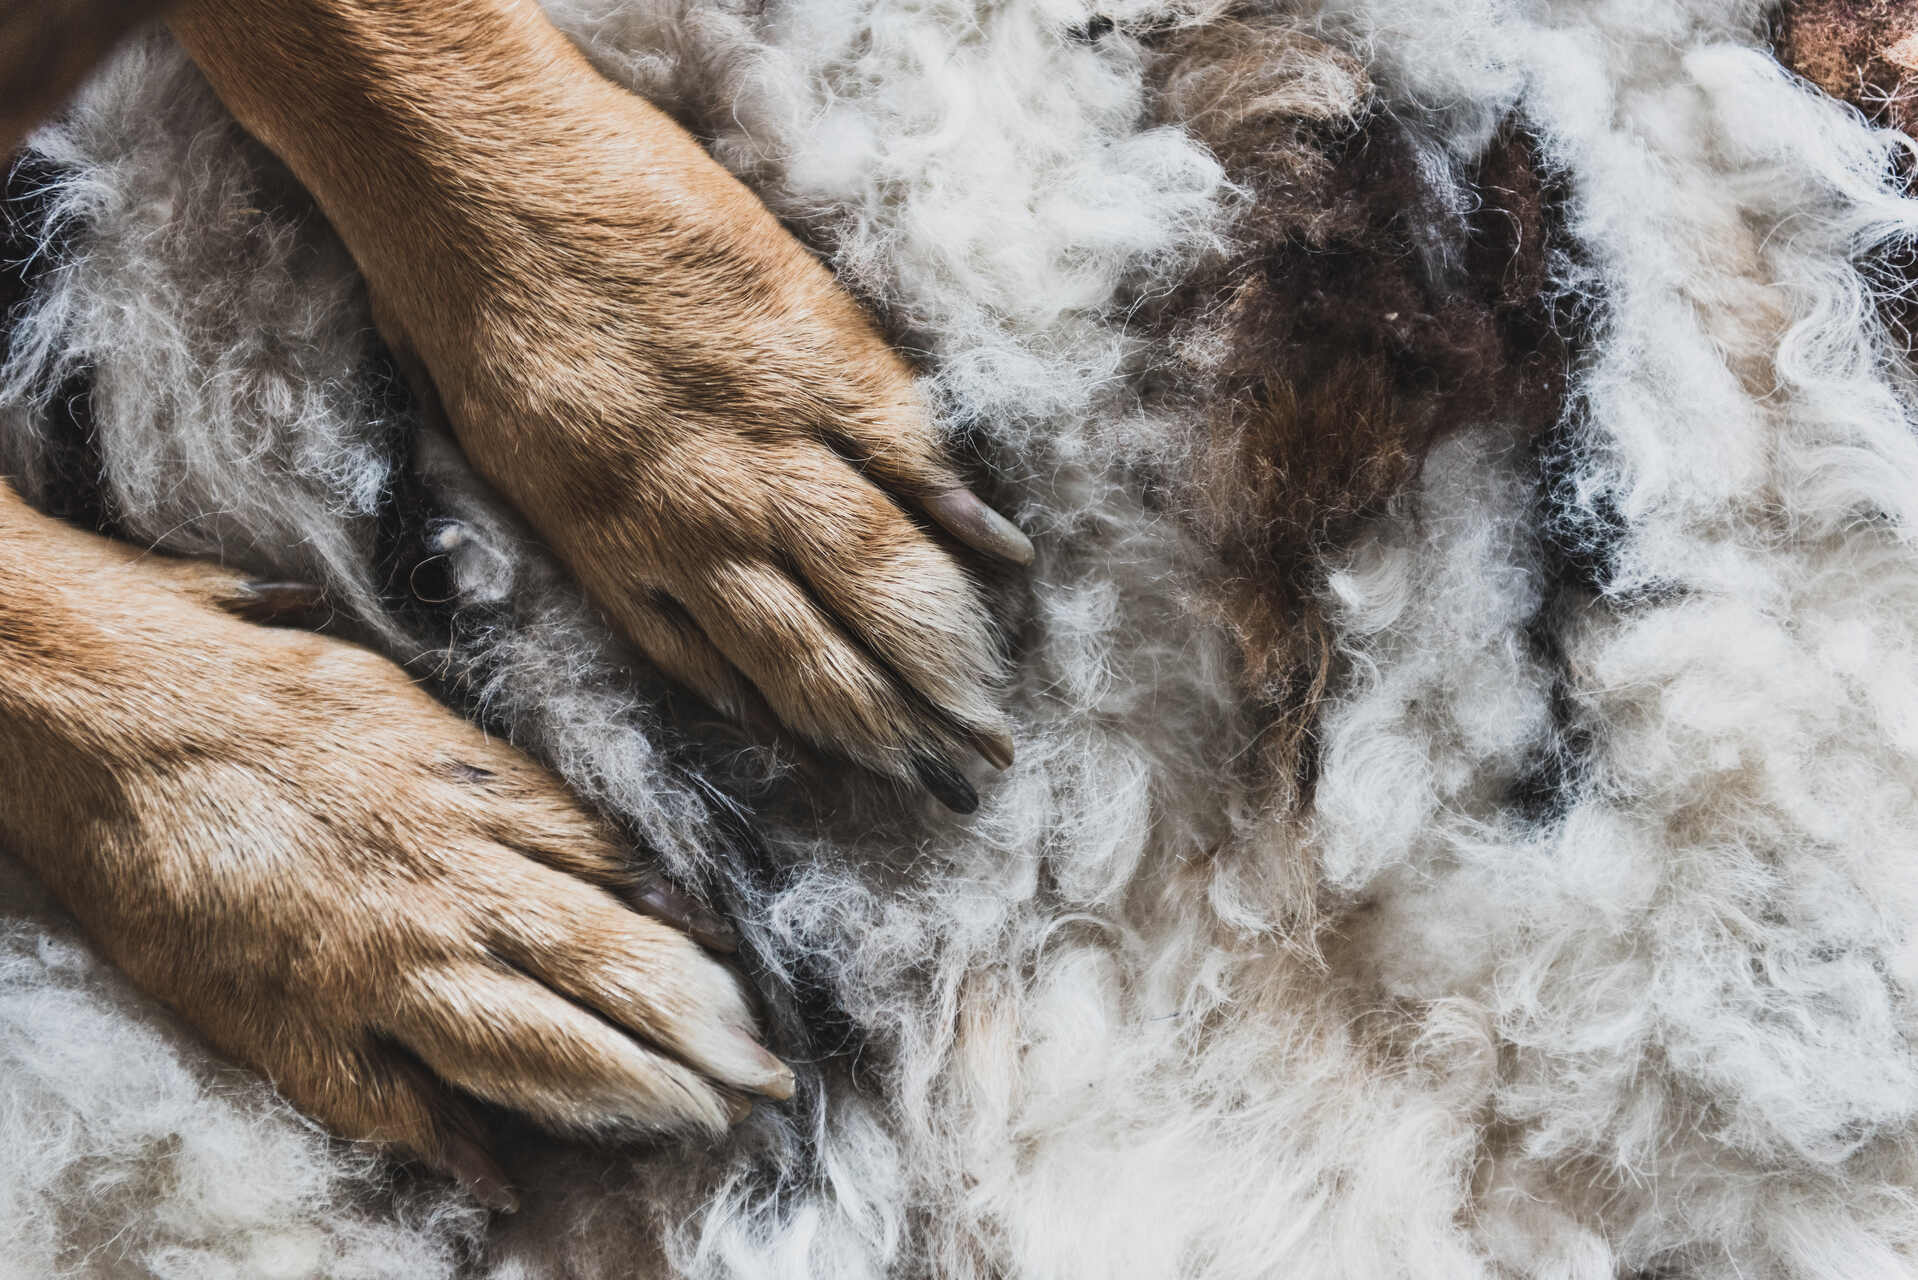 A dog's paws resting on a heap of shed fur